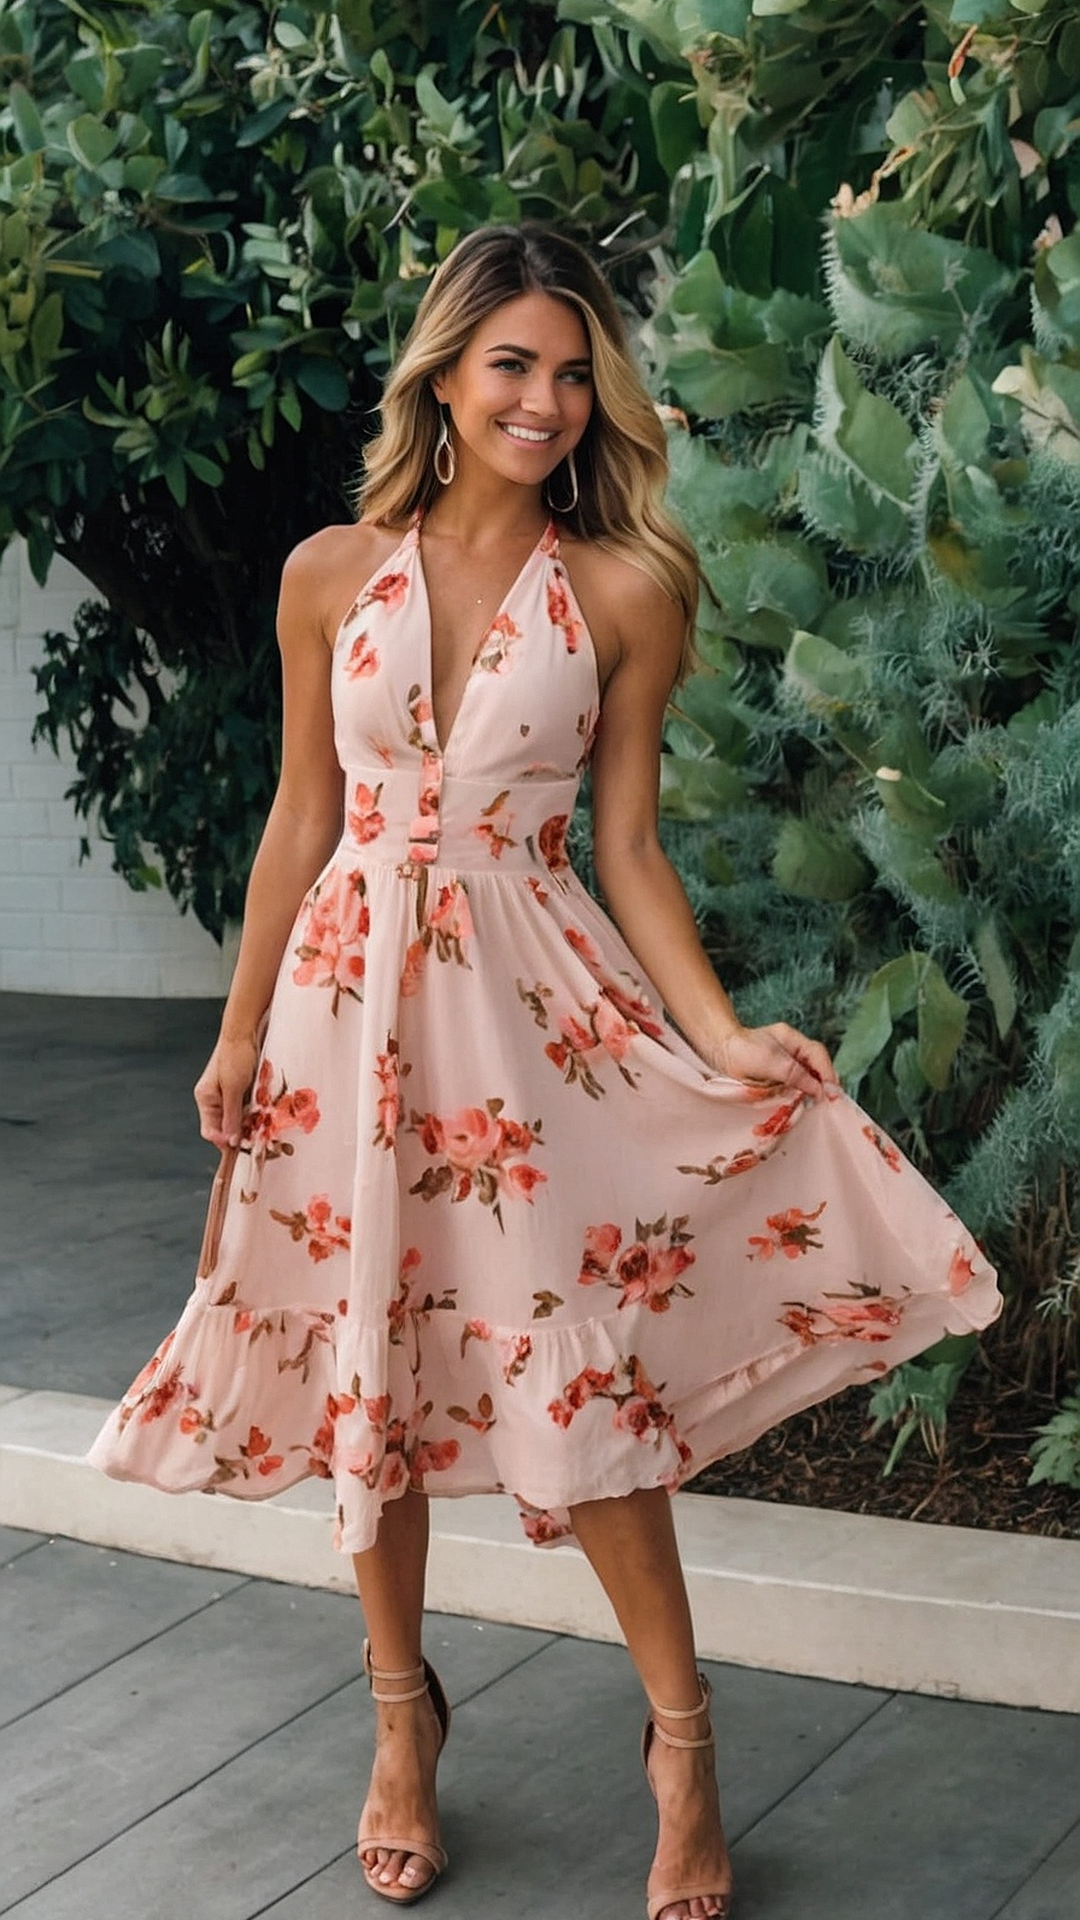 Floral Finesse: Maxi Dress Edition